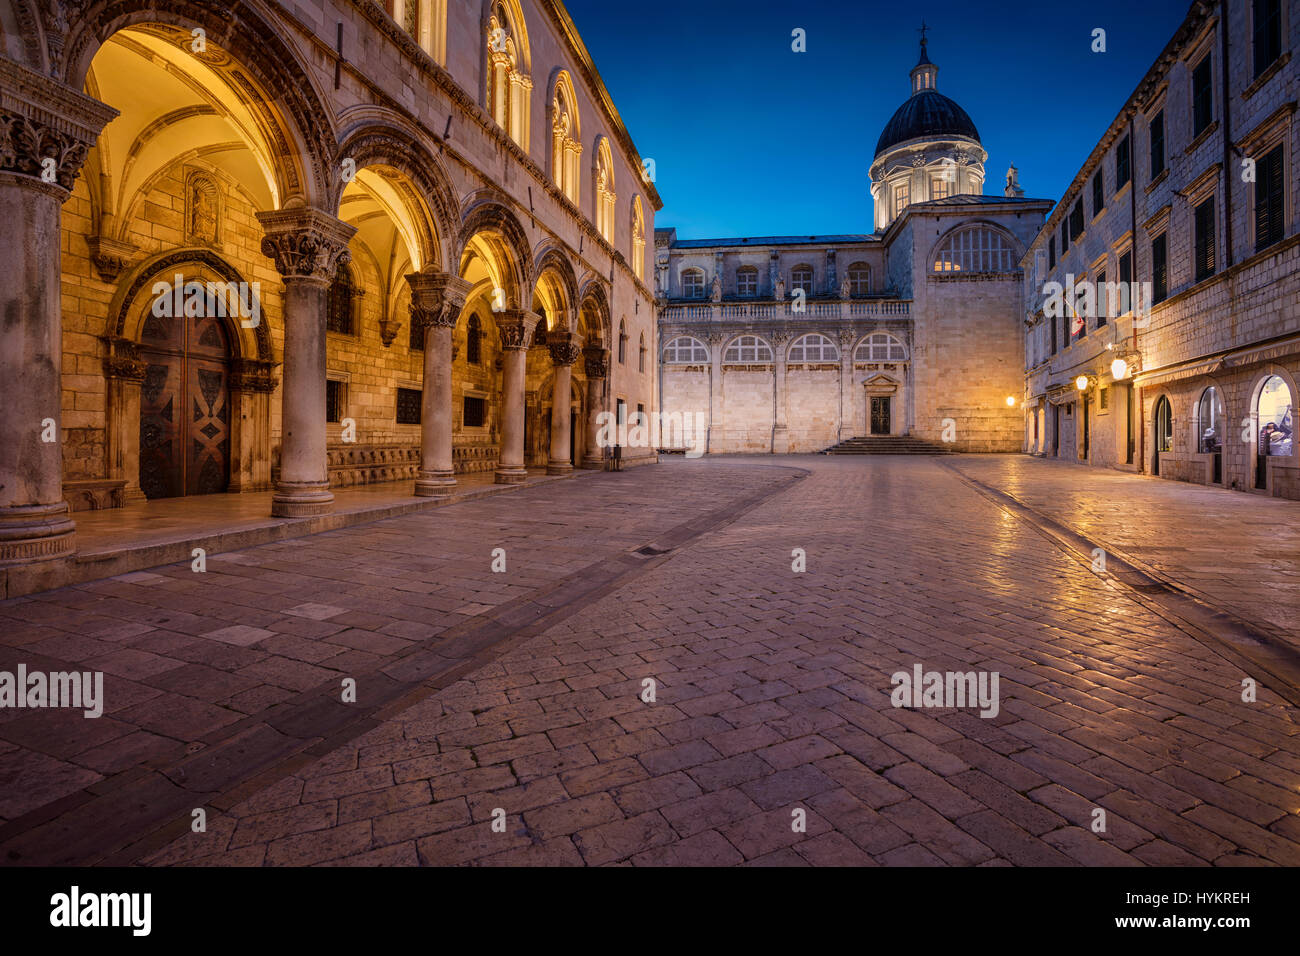 Dubrovnik. Beautiful romantic streets of old town Dubrovnik during twilight blue hour. Stock Photo